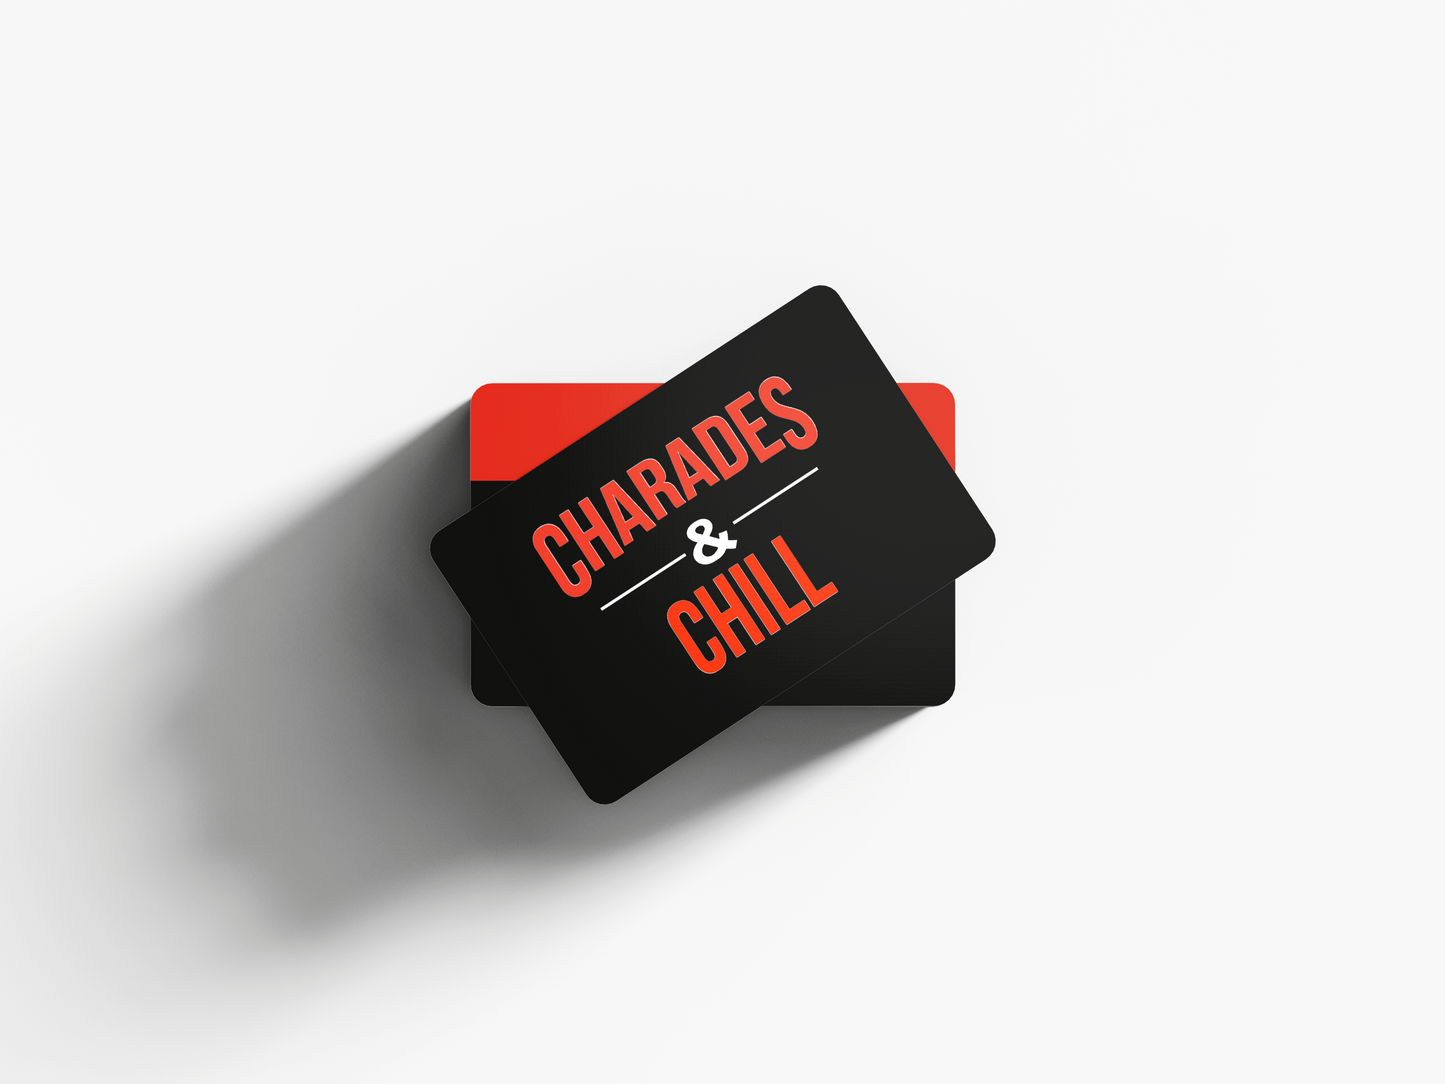 Charades And Chill Charades Game For Adults